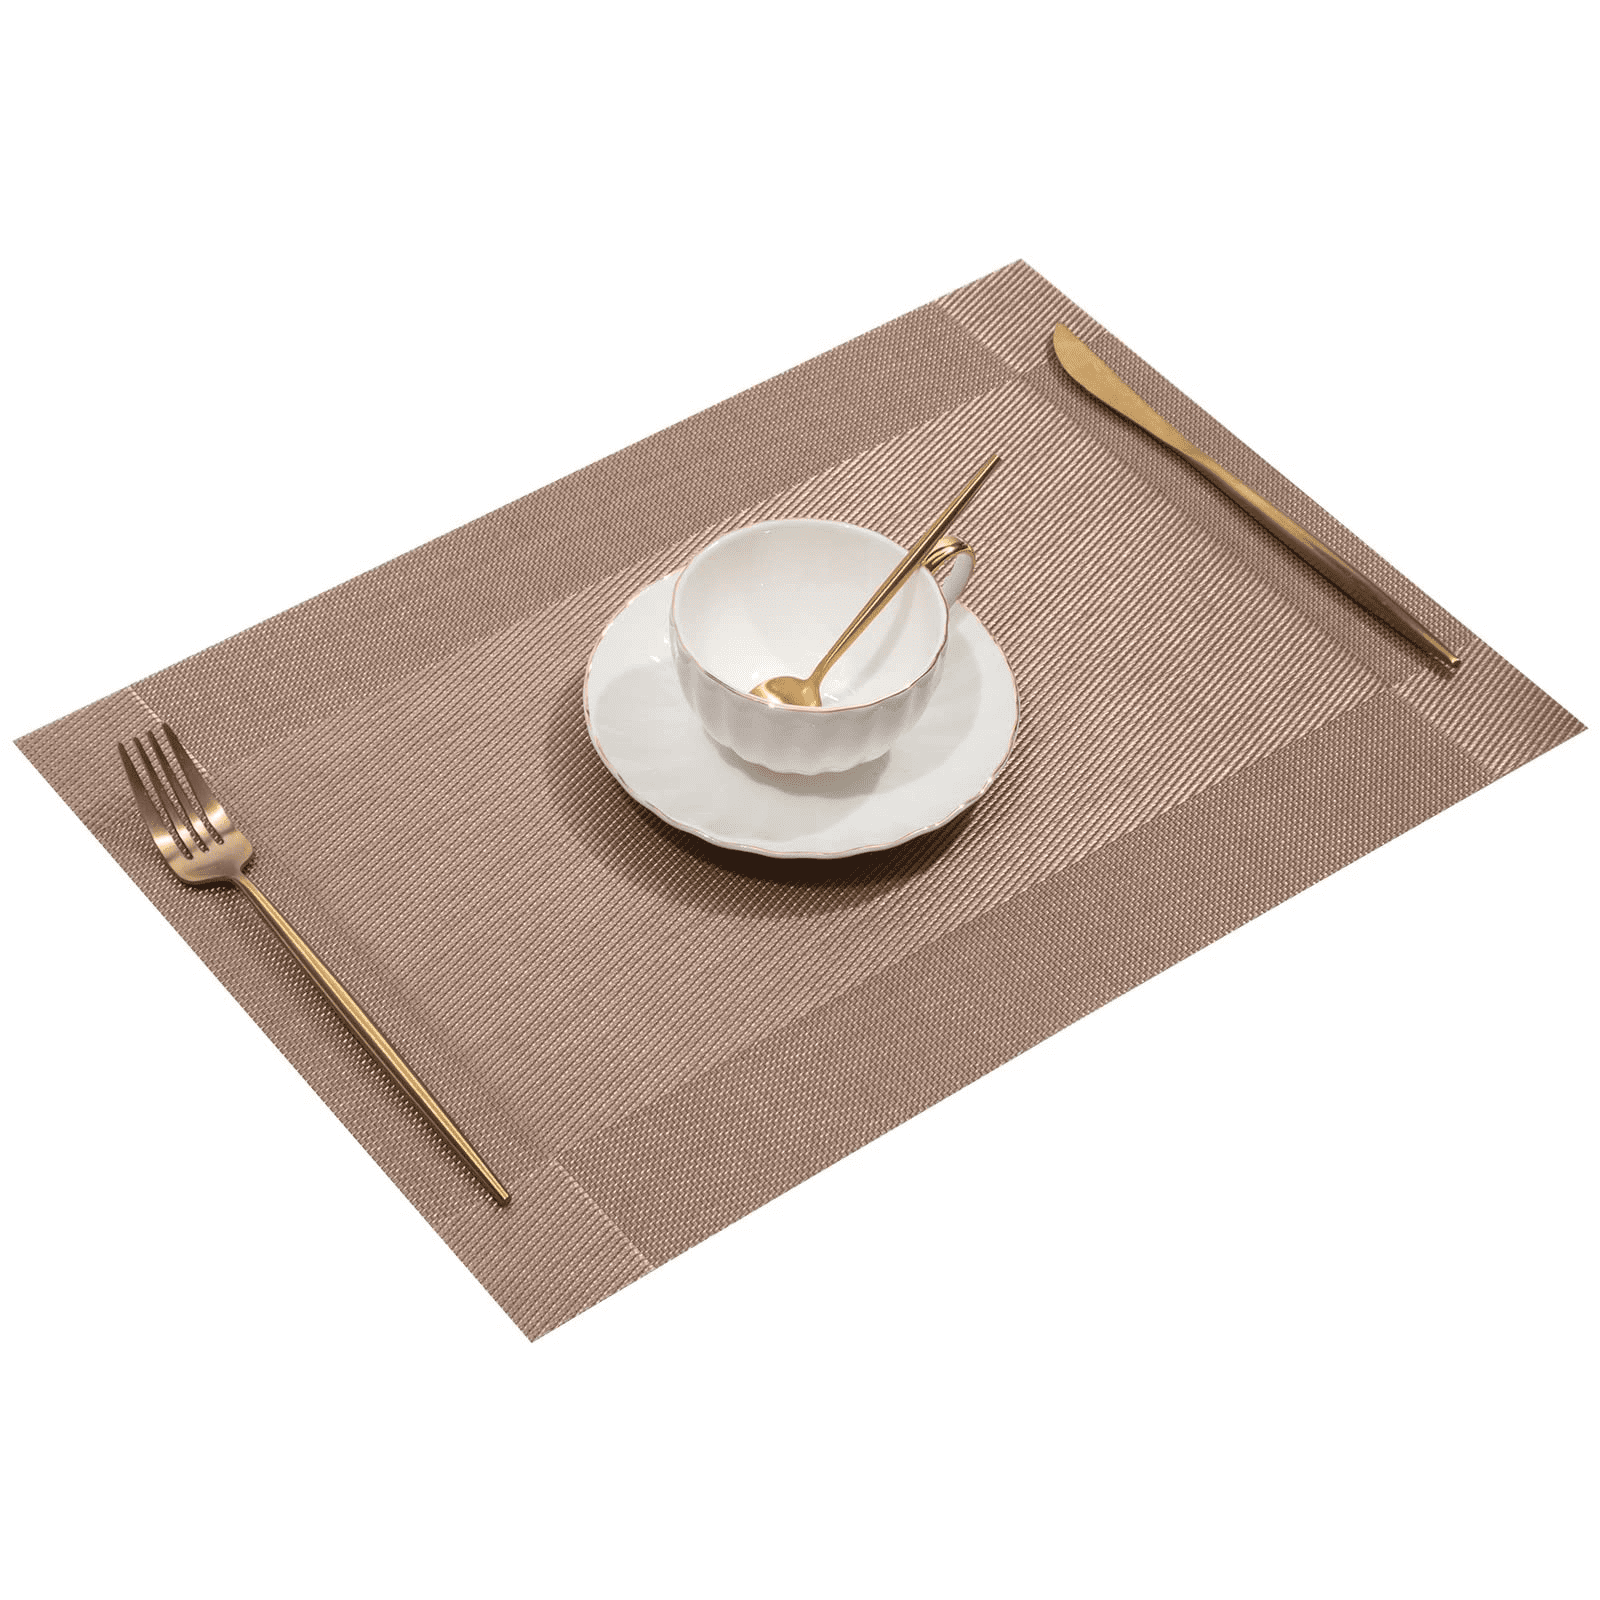 Ludlz Elegant Placemats Woven Vinyl Placemat Non-Slip Heat Resistant  Kitchen Table Mats Easy to Clean Round Cup Coasters Heat Insulated Bowl  Plate Mat